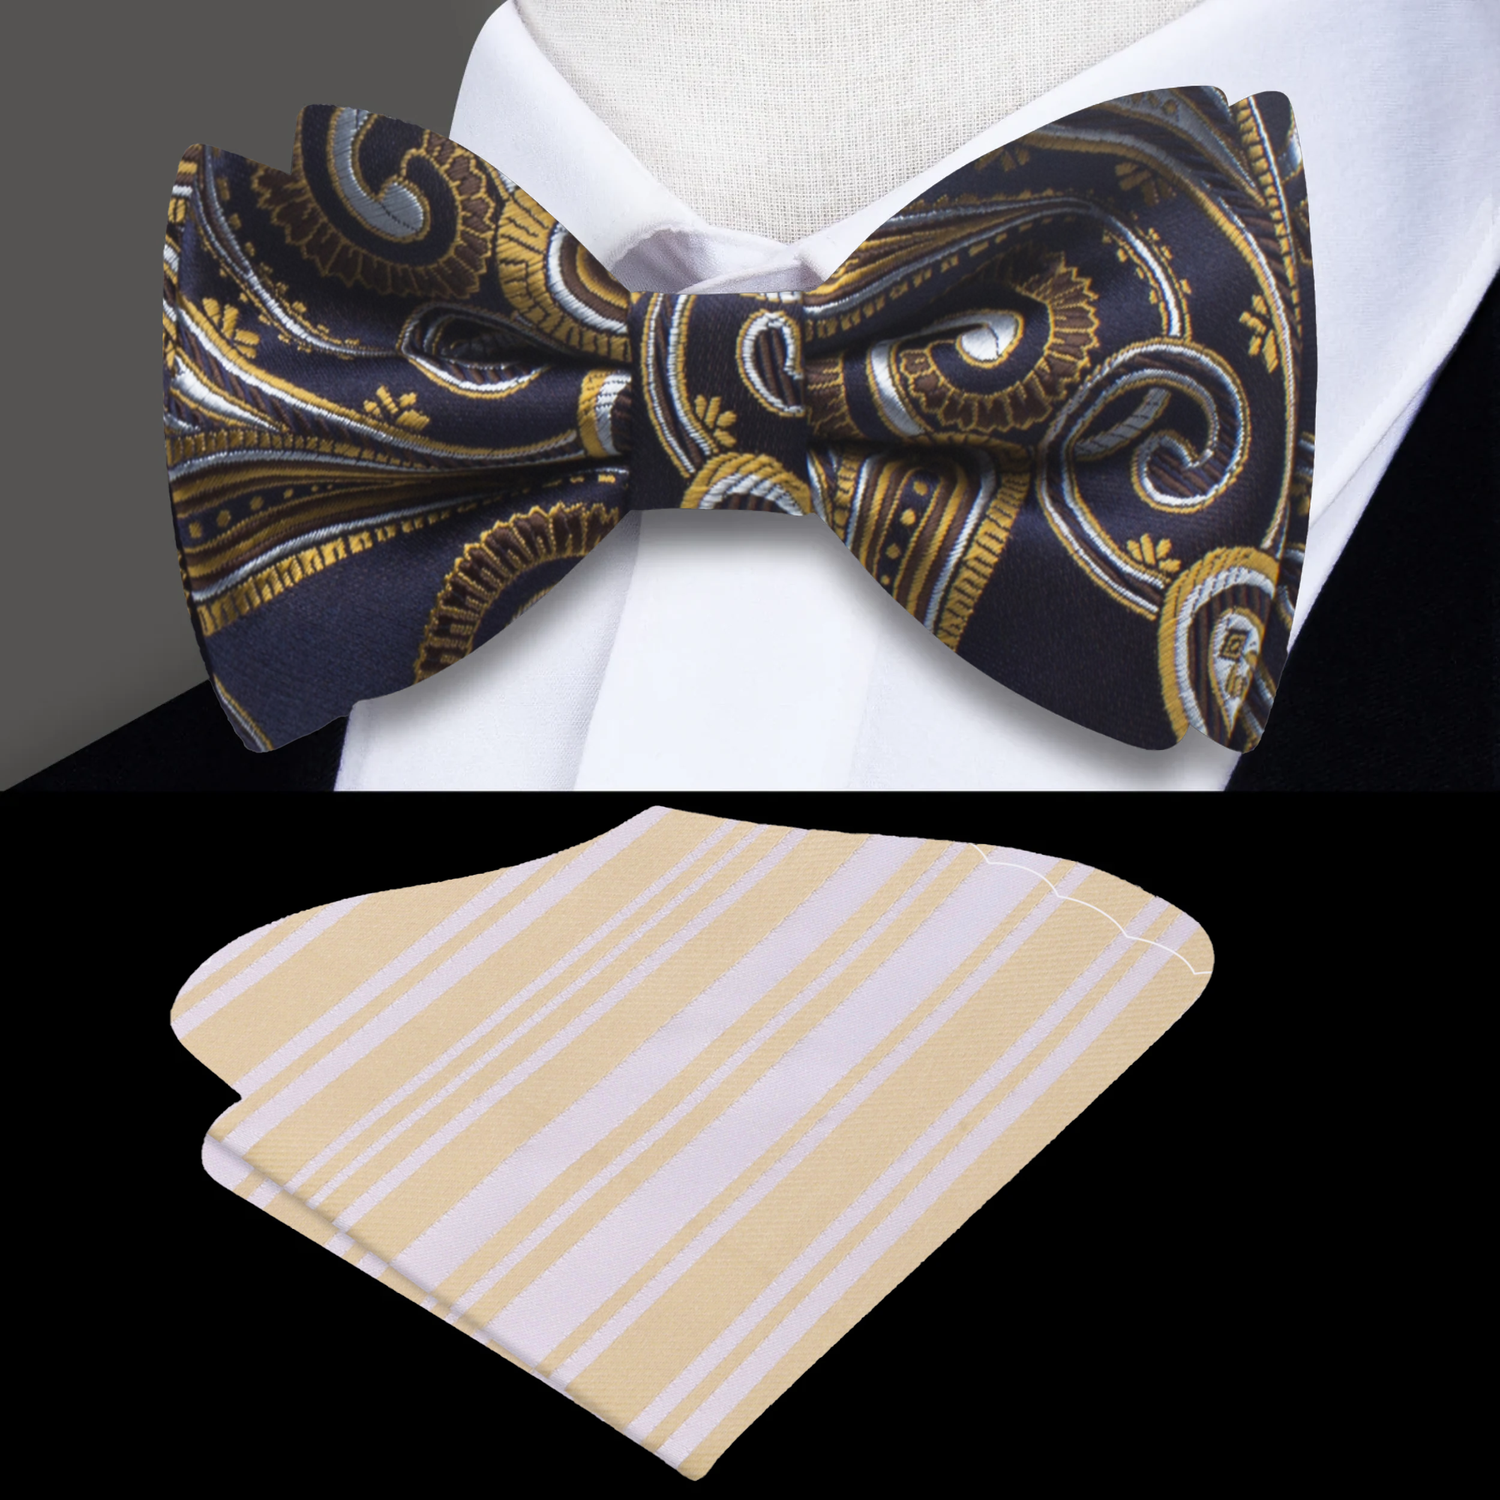 Blue and Gold Paisley Bow Tie wit hYellow Stripe Square